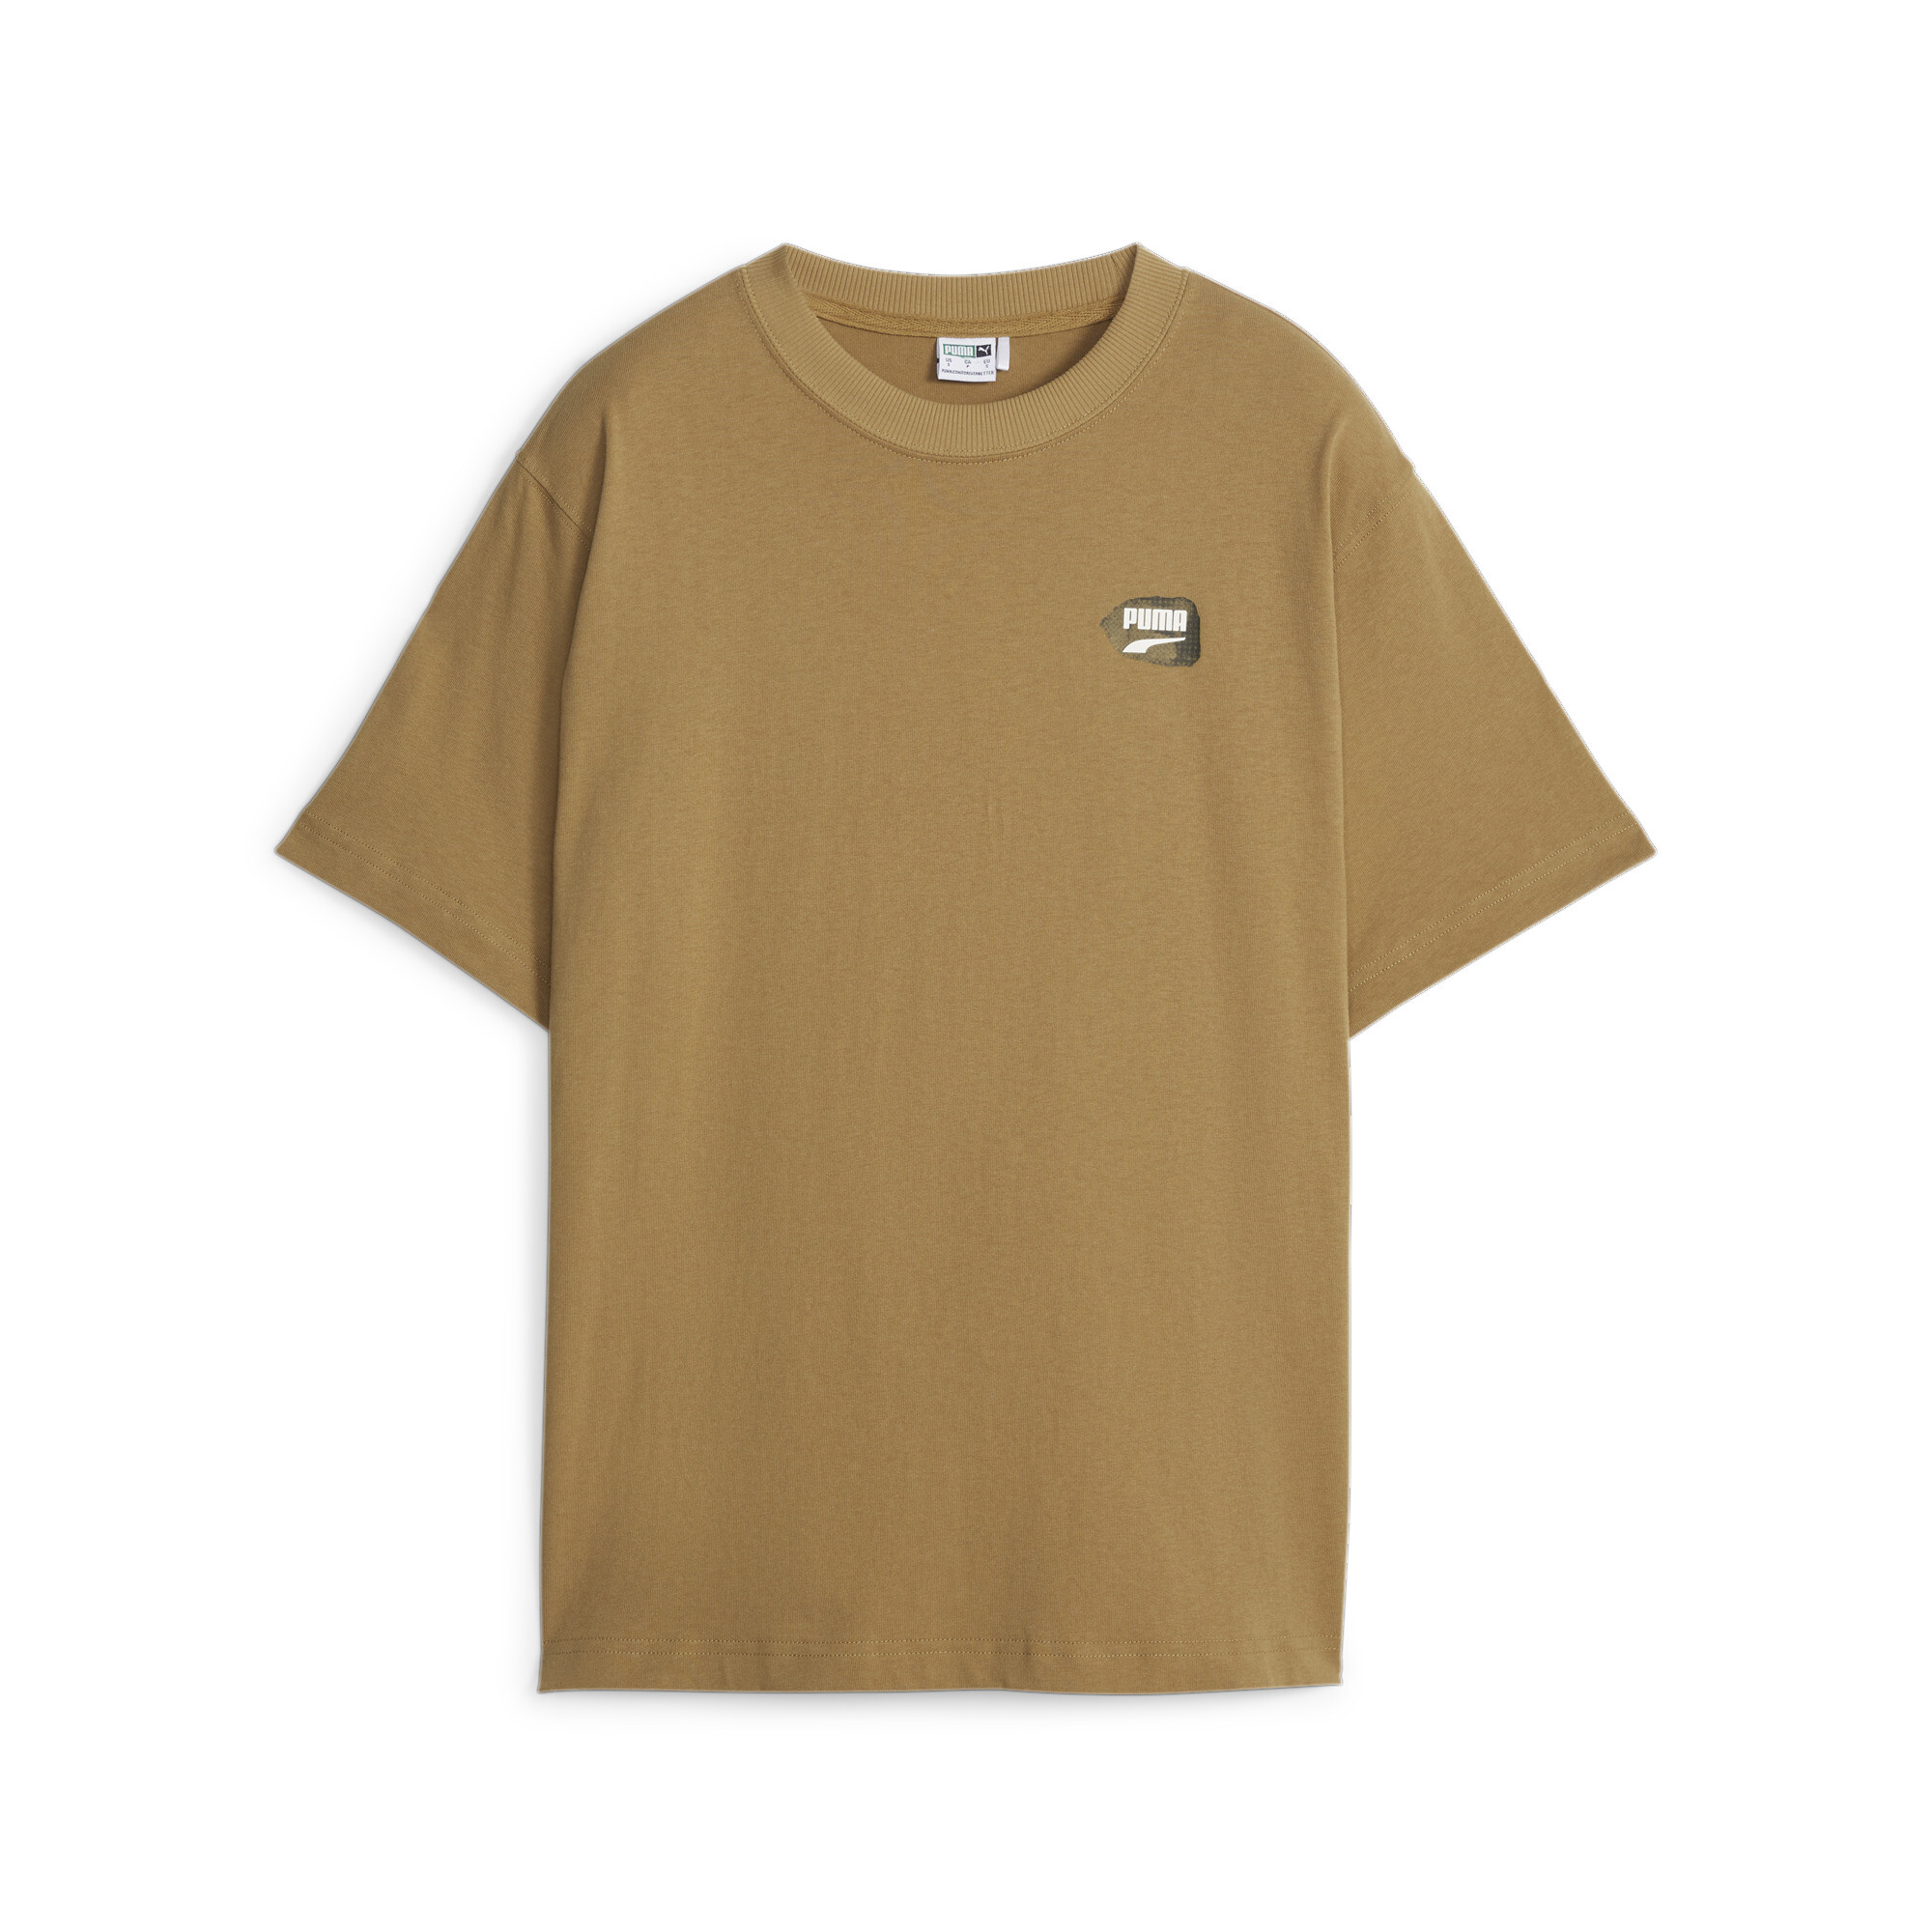 Women's PUMA DOWNTOWN Relaxed Graphic T-Shirt In Beige, Size XS